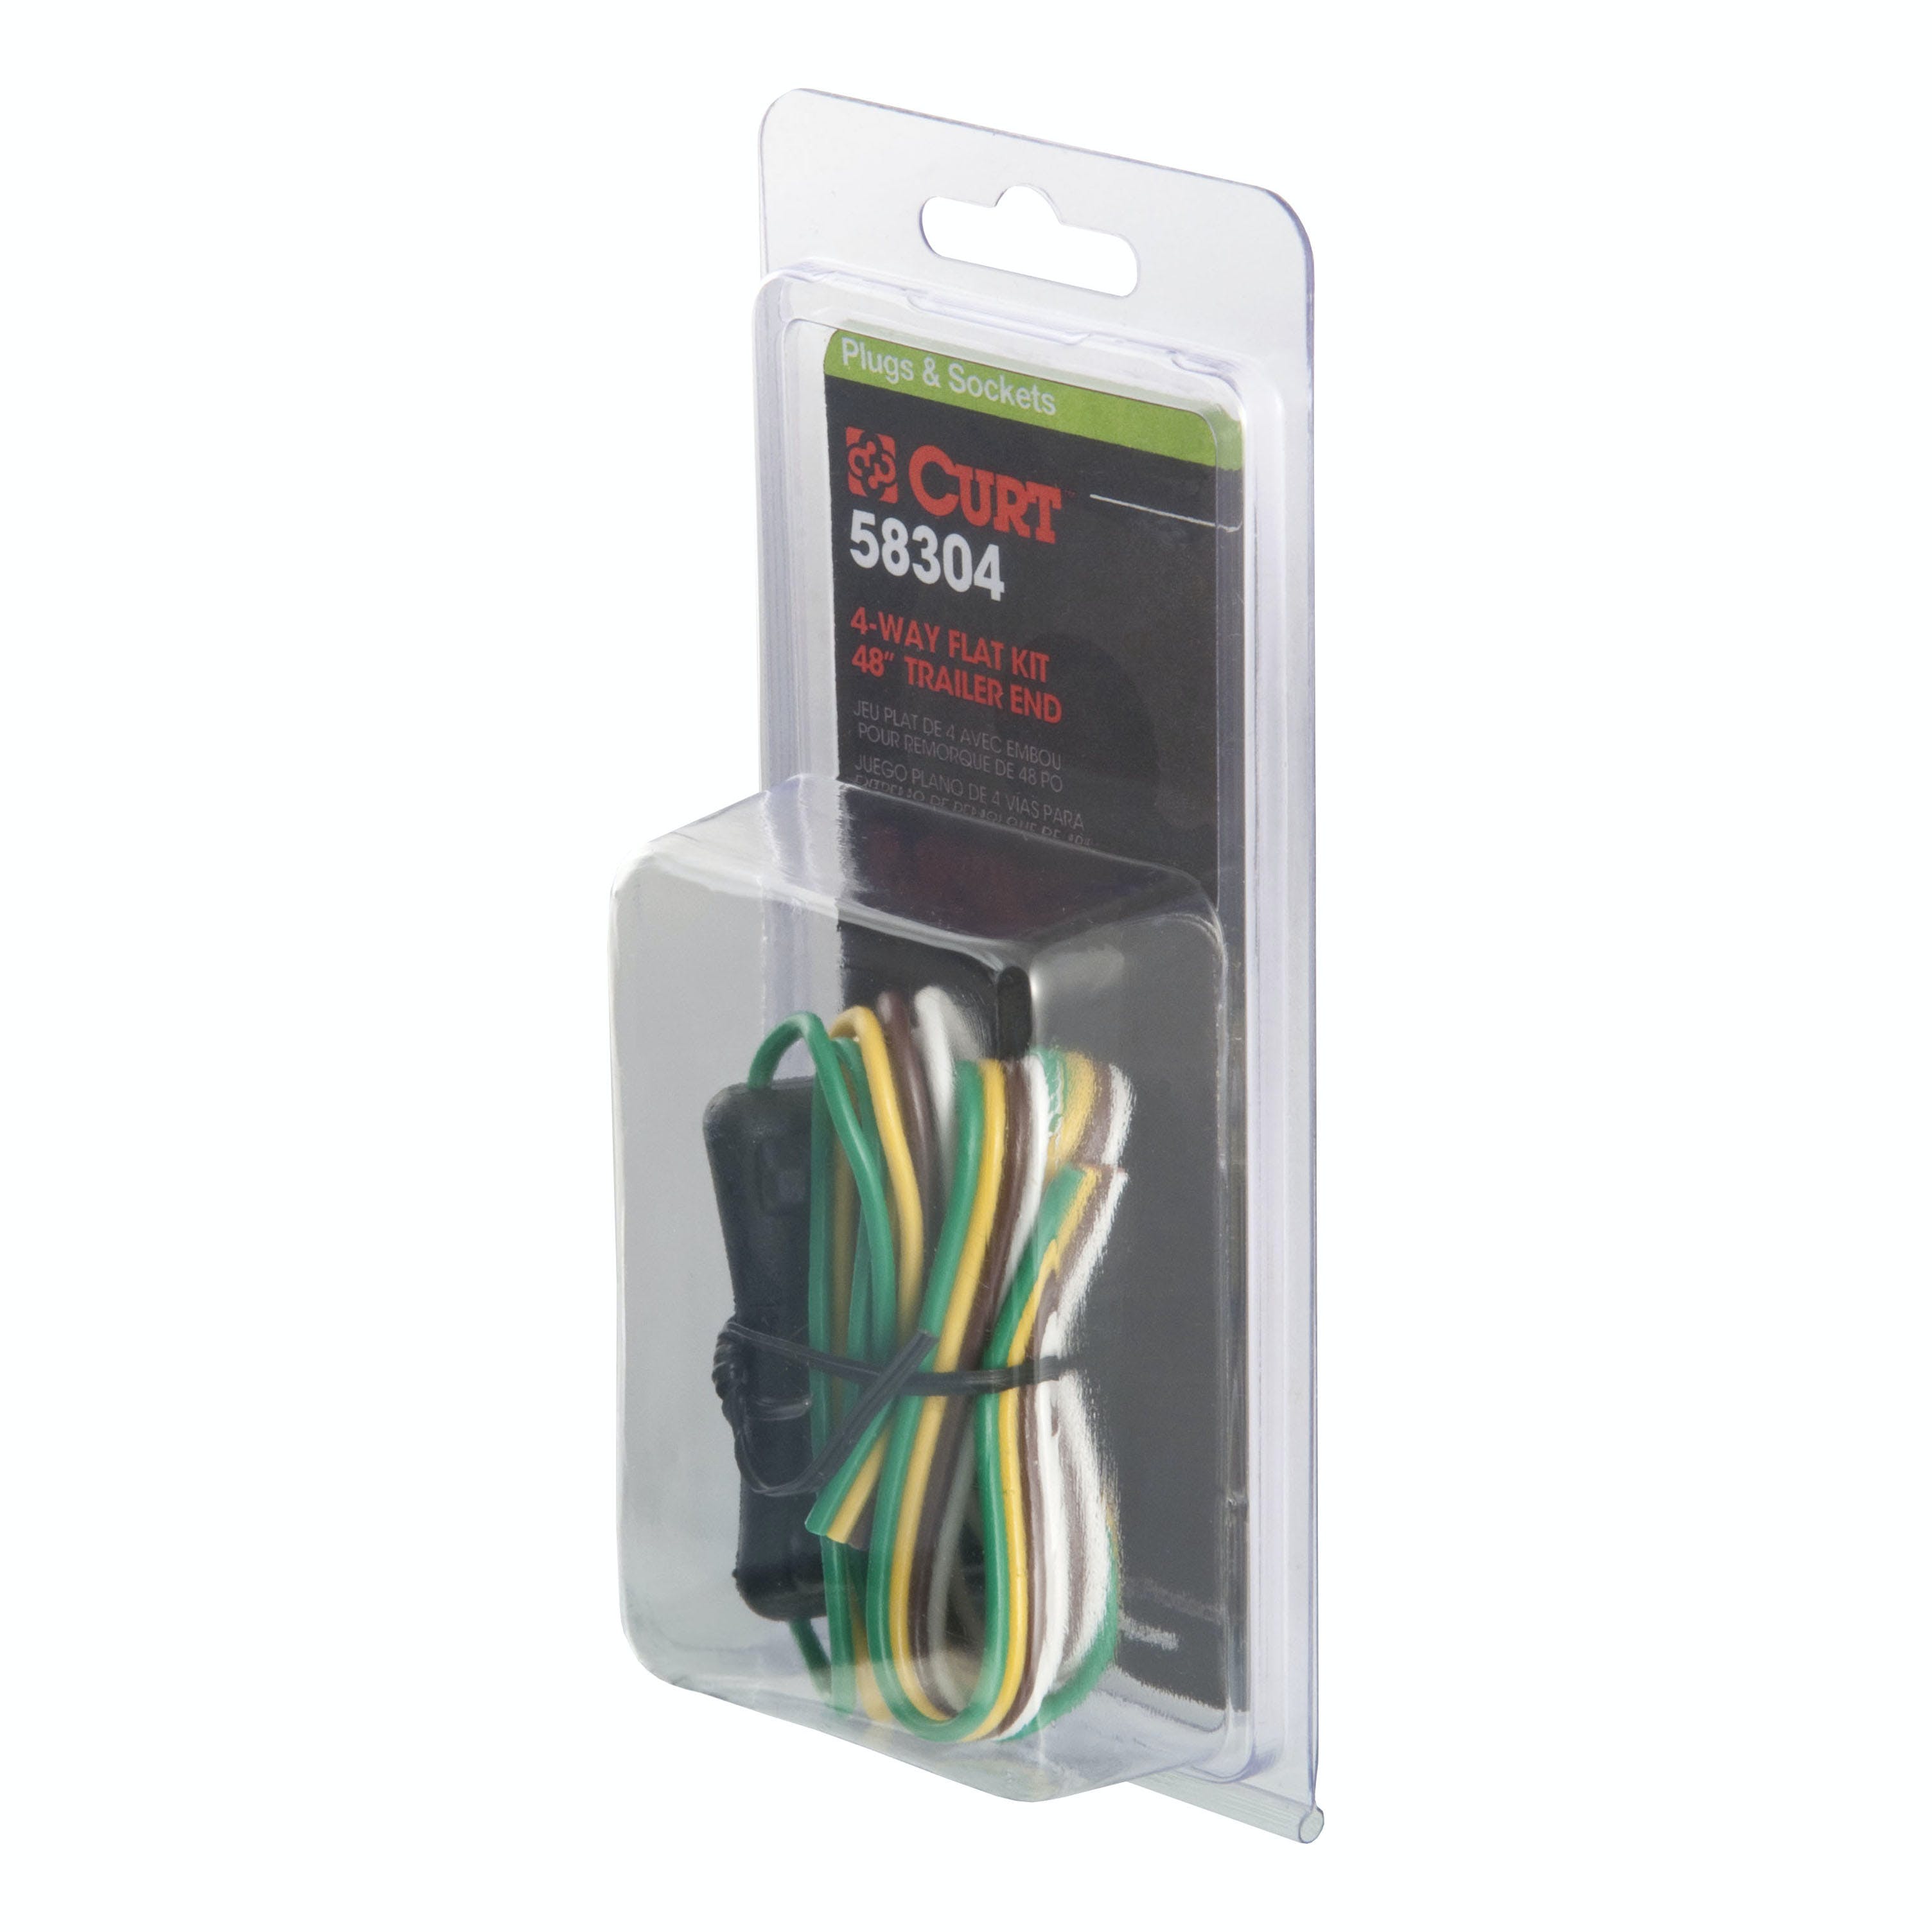 CURT 58304 4-Way Flat Connector Plug and Socket with 12 Wires Each (Packaged)